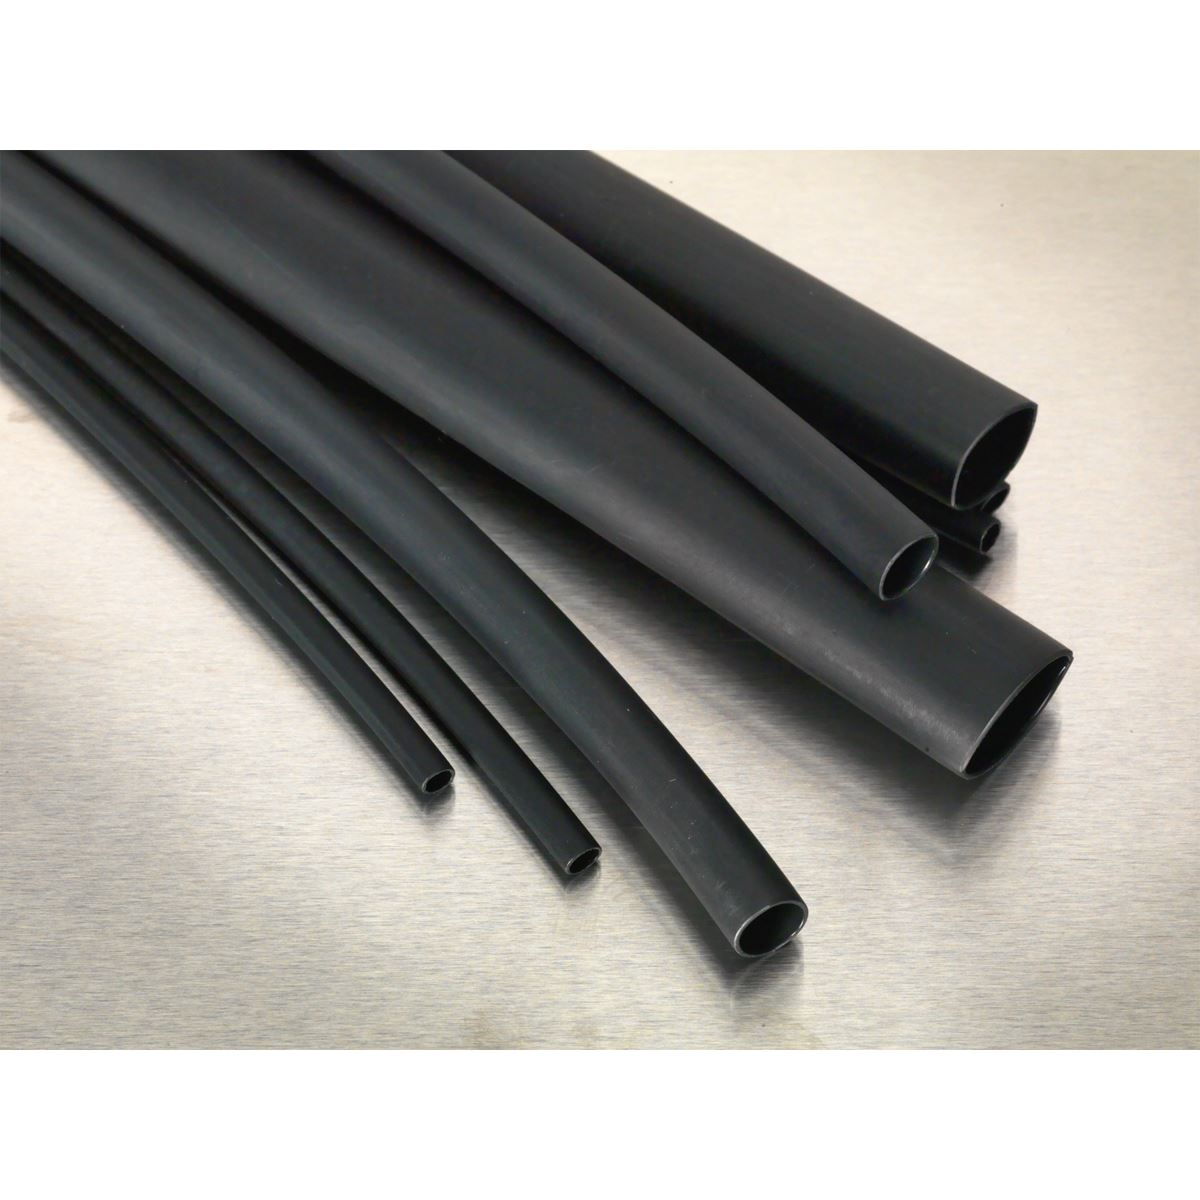 Sealey Heat Shrink Tubing Assortment 72pc Black Adhesive Lined 200mm